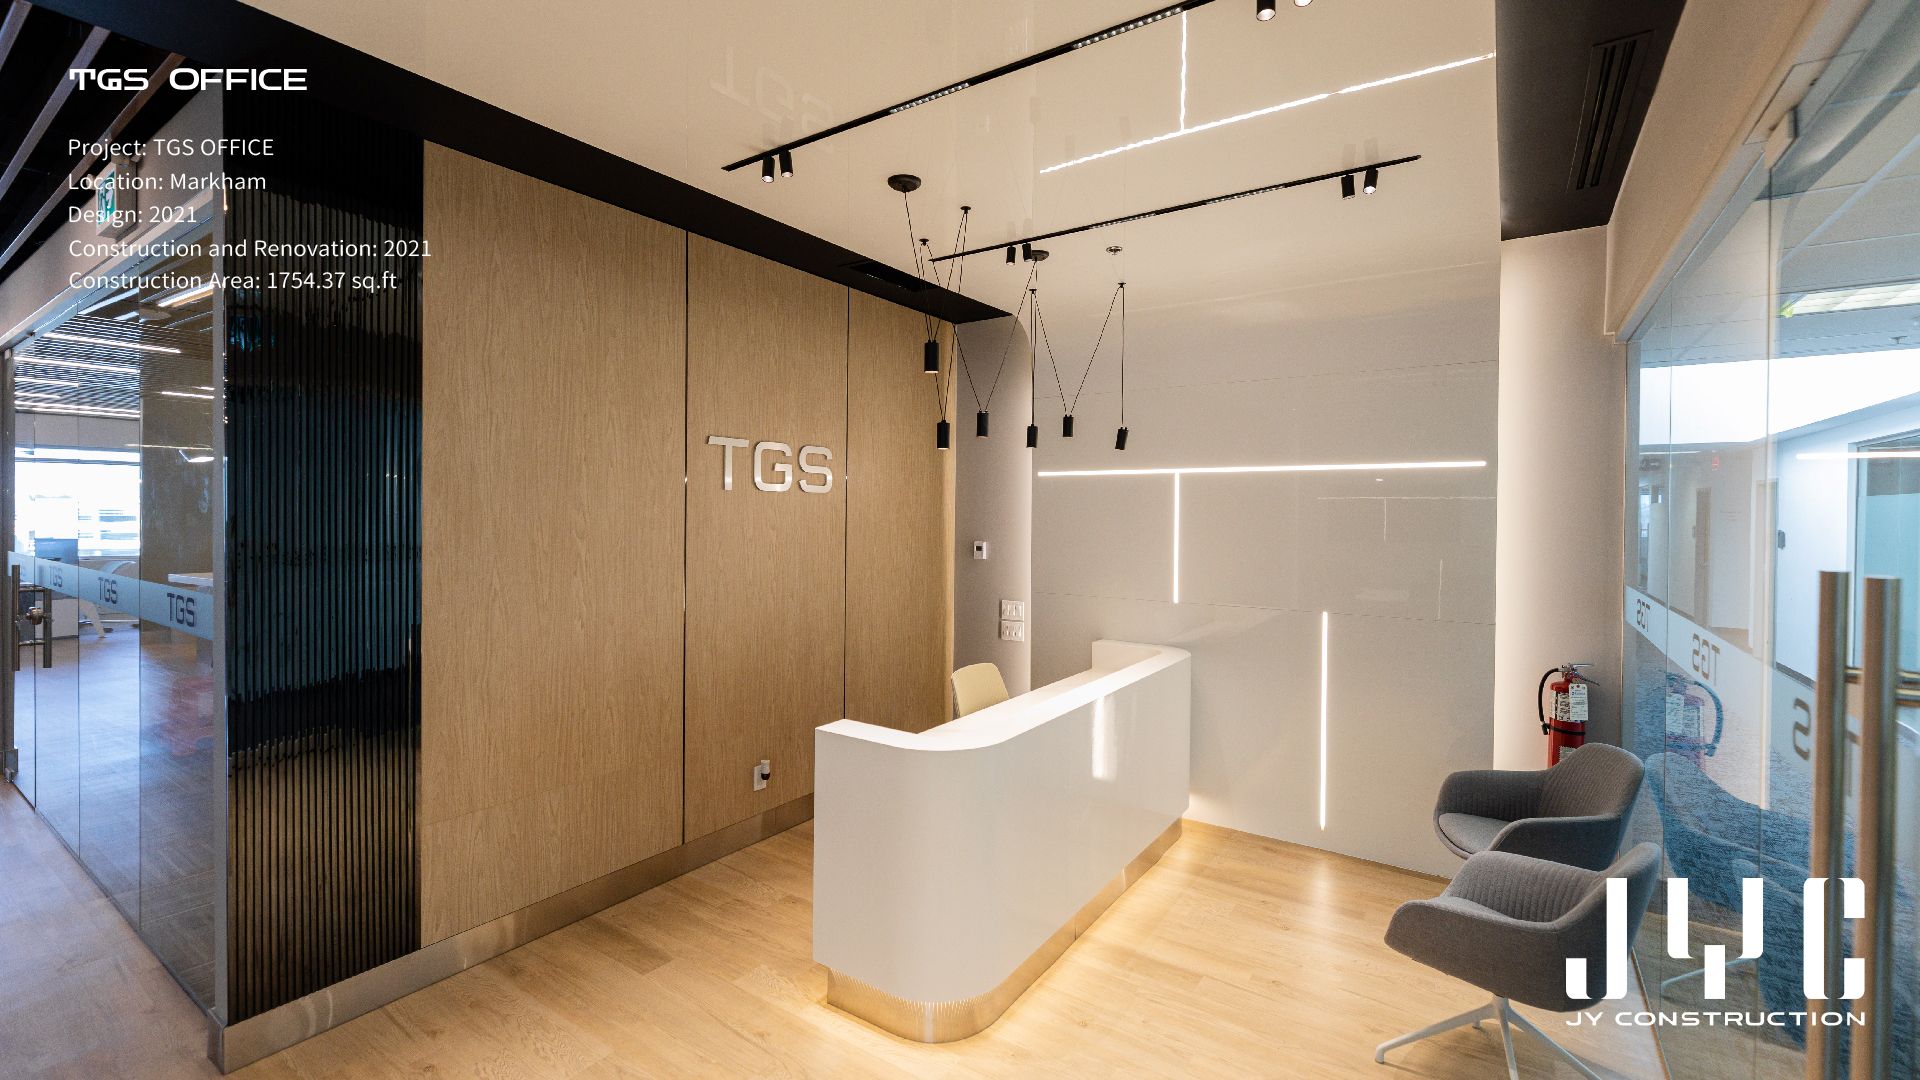 TGS-office-office-design-in-markham-by-jy-construction-in-english-1.jpg